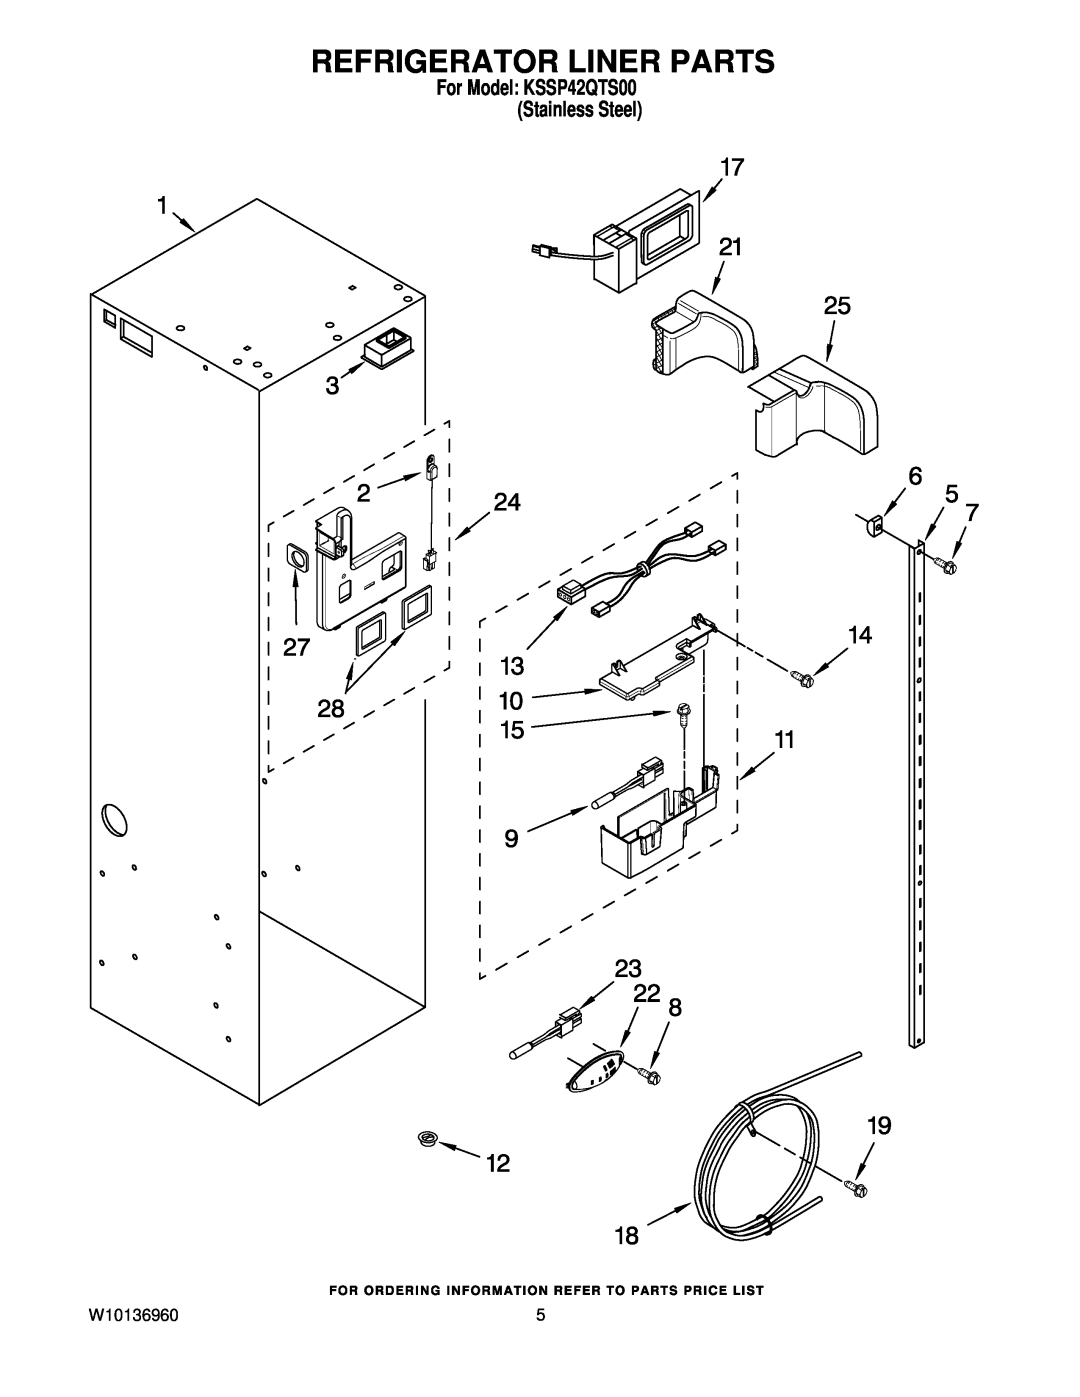 KitchenAid manual Refrigerator Liner Parts, W10136960, For Model KSSP42QTS00 Stainless Steel 